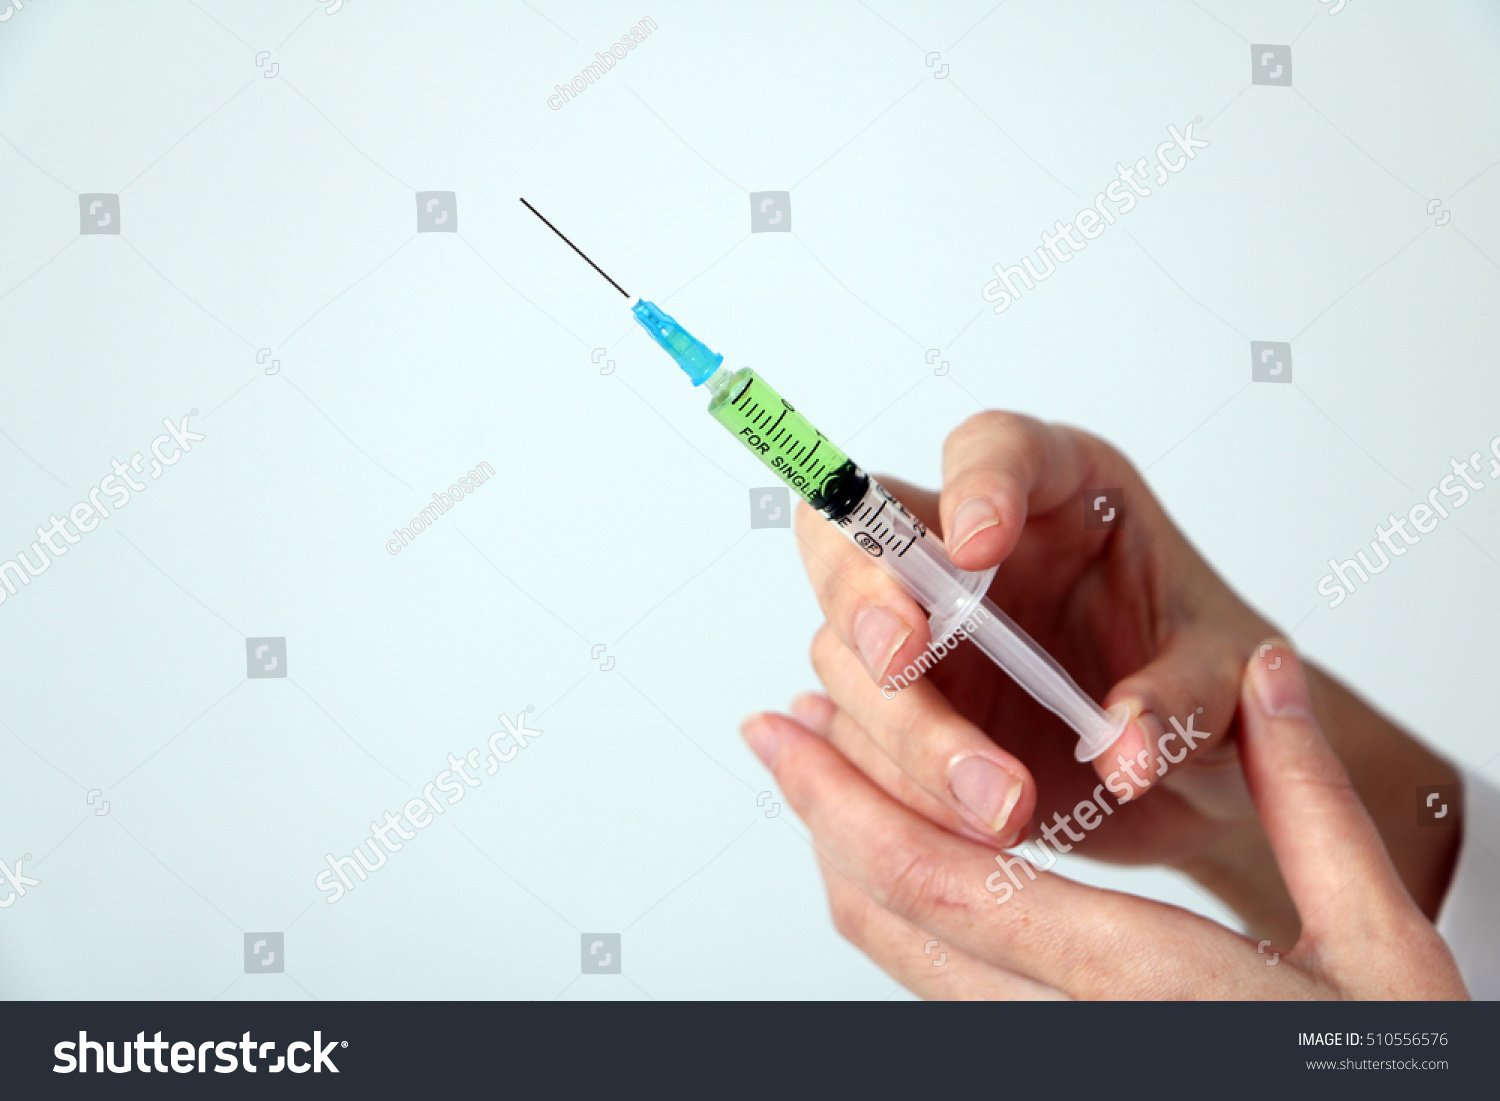 injector held by woman hand #510556576